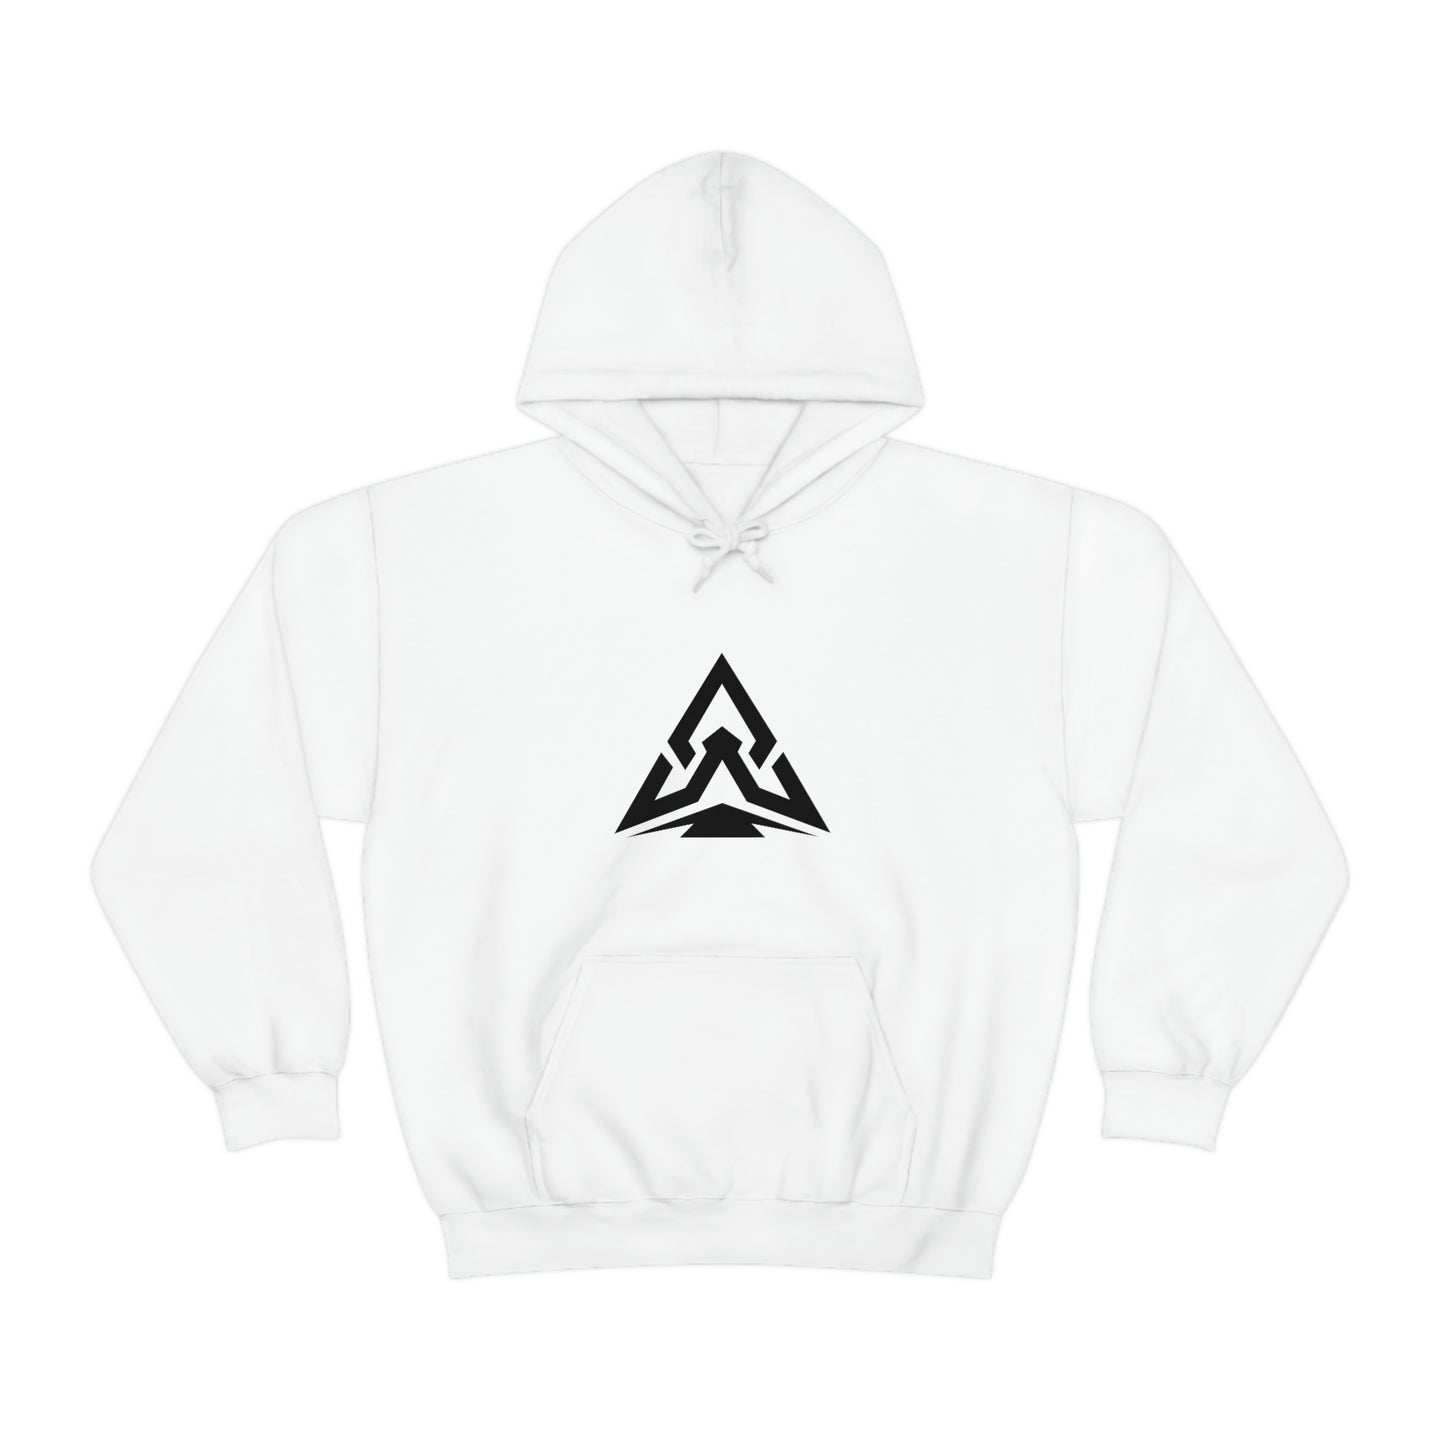 Andy Whittier "AW" Hoodie